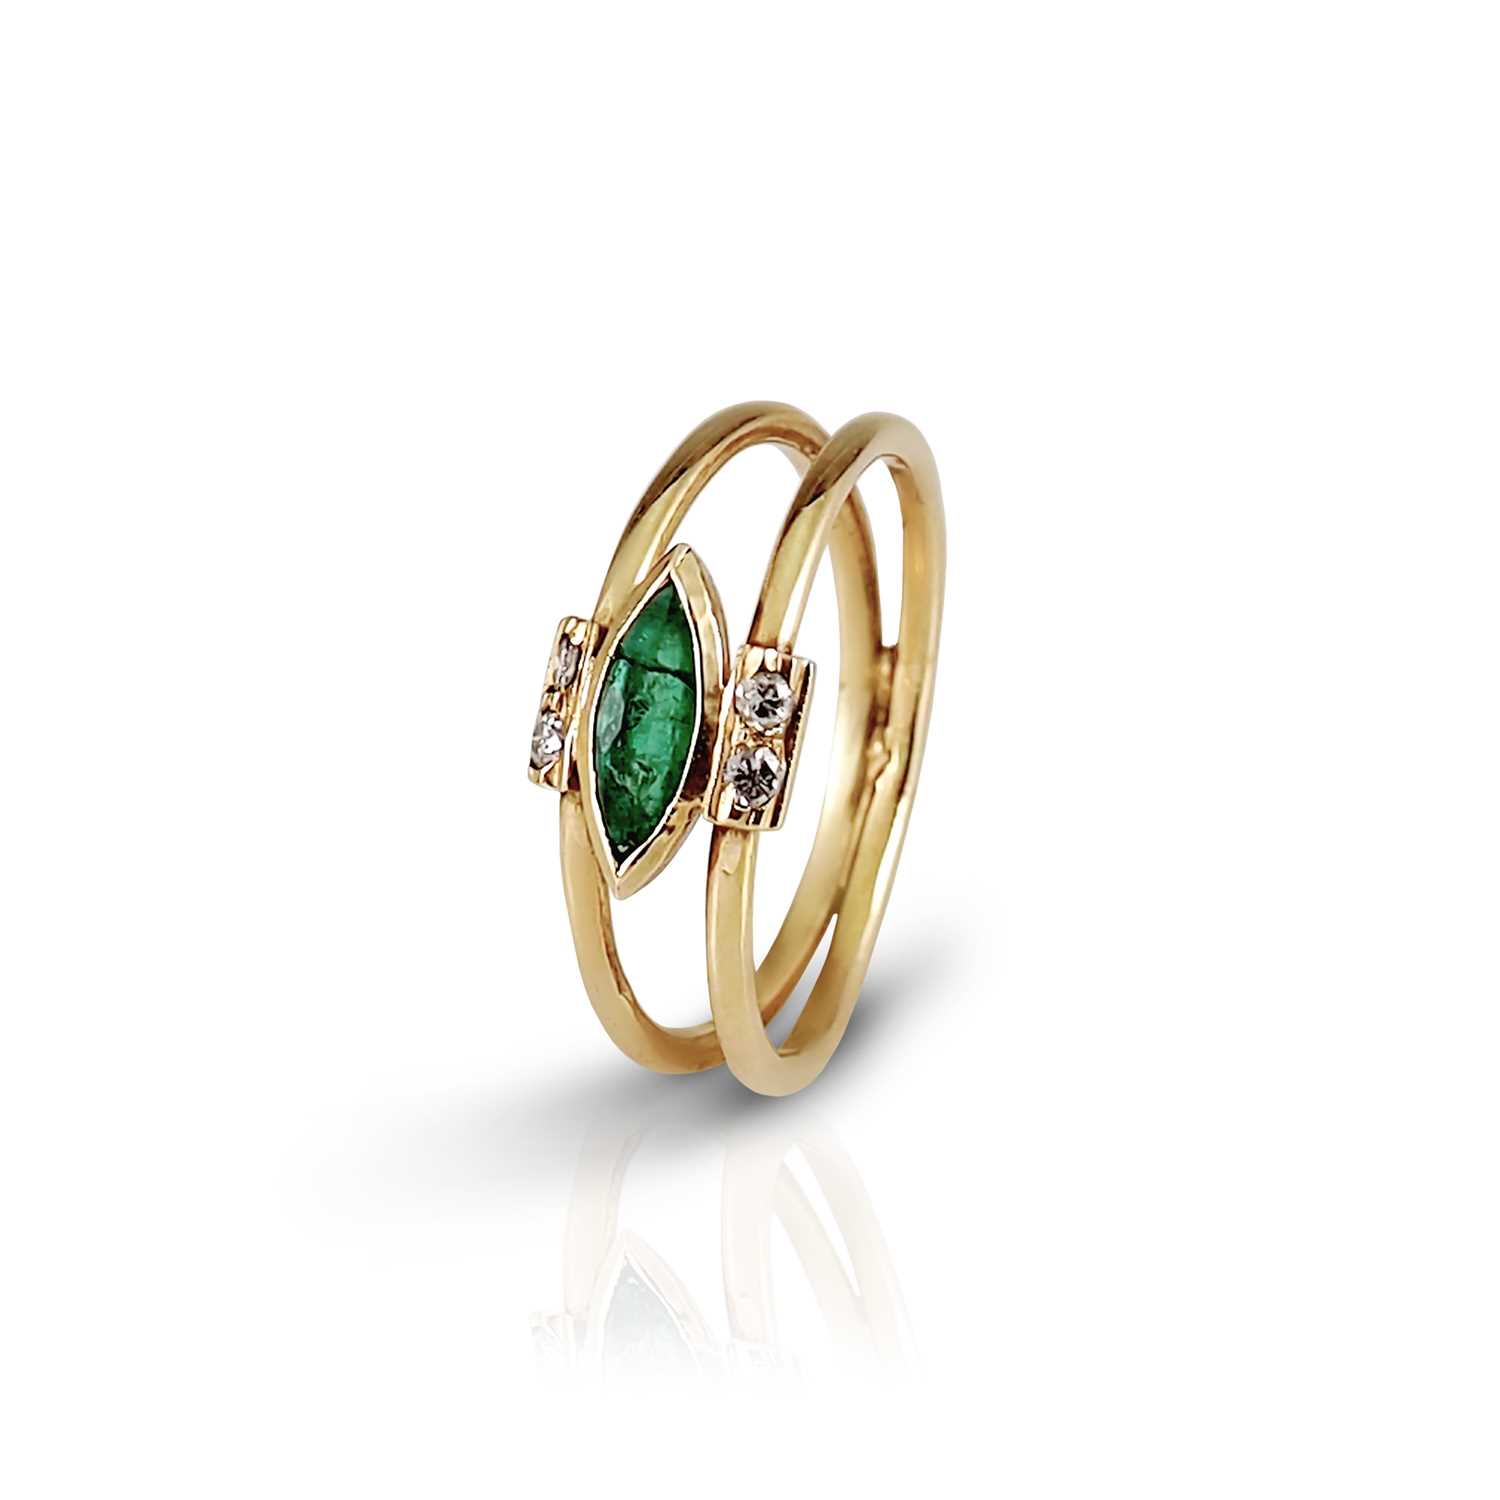 Lot 23 - 14K Gold, Emerald and Diamond Ring